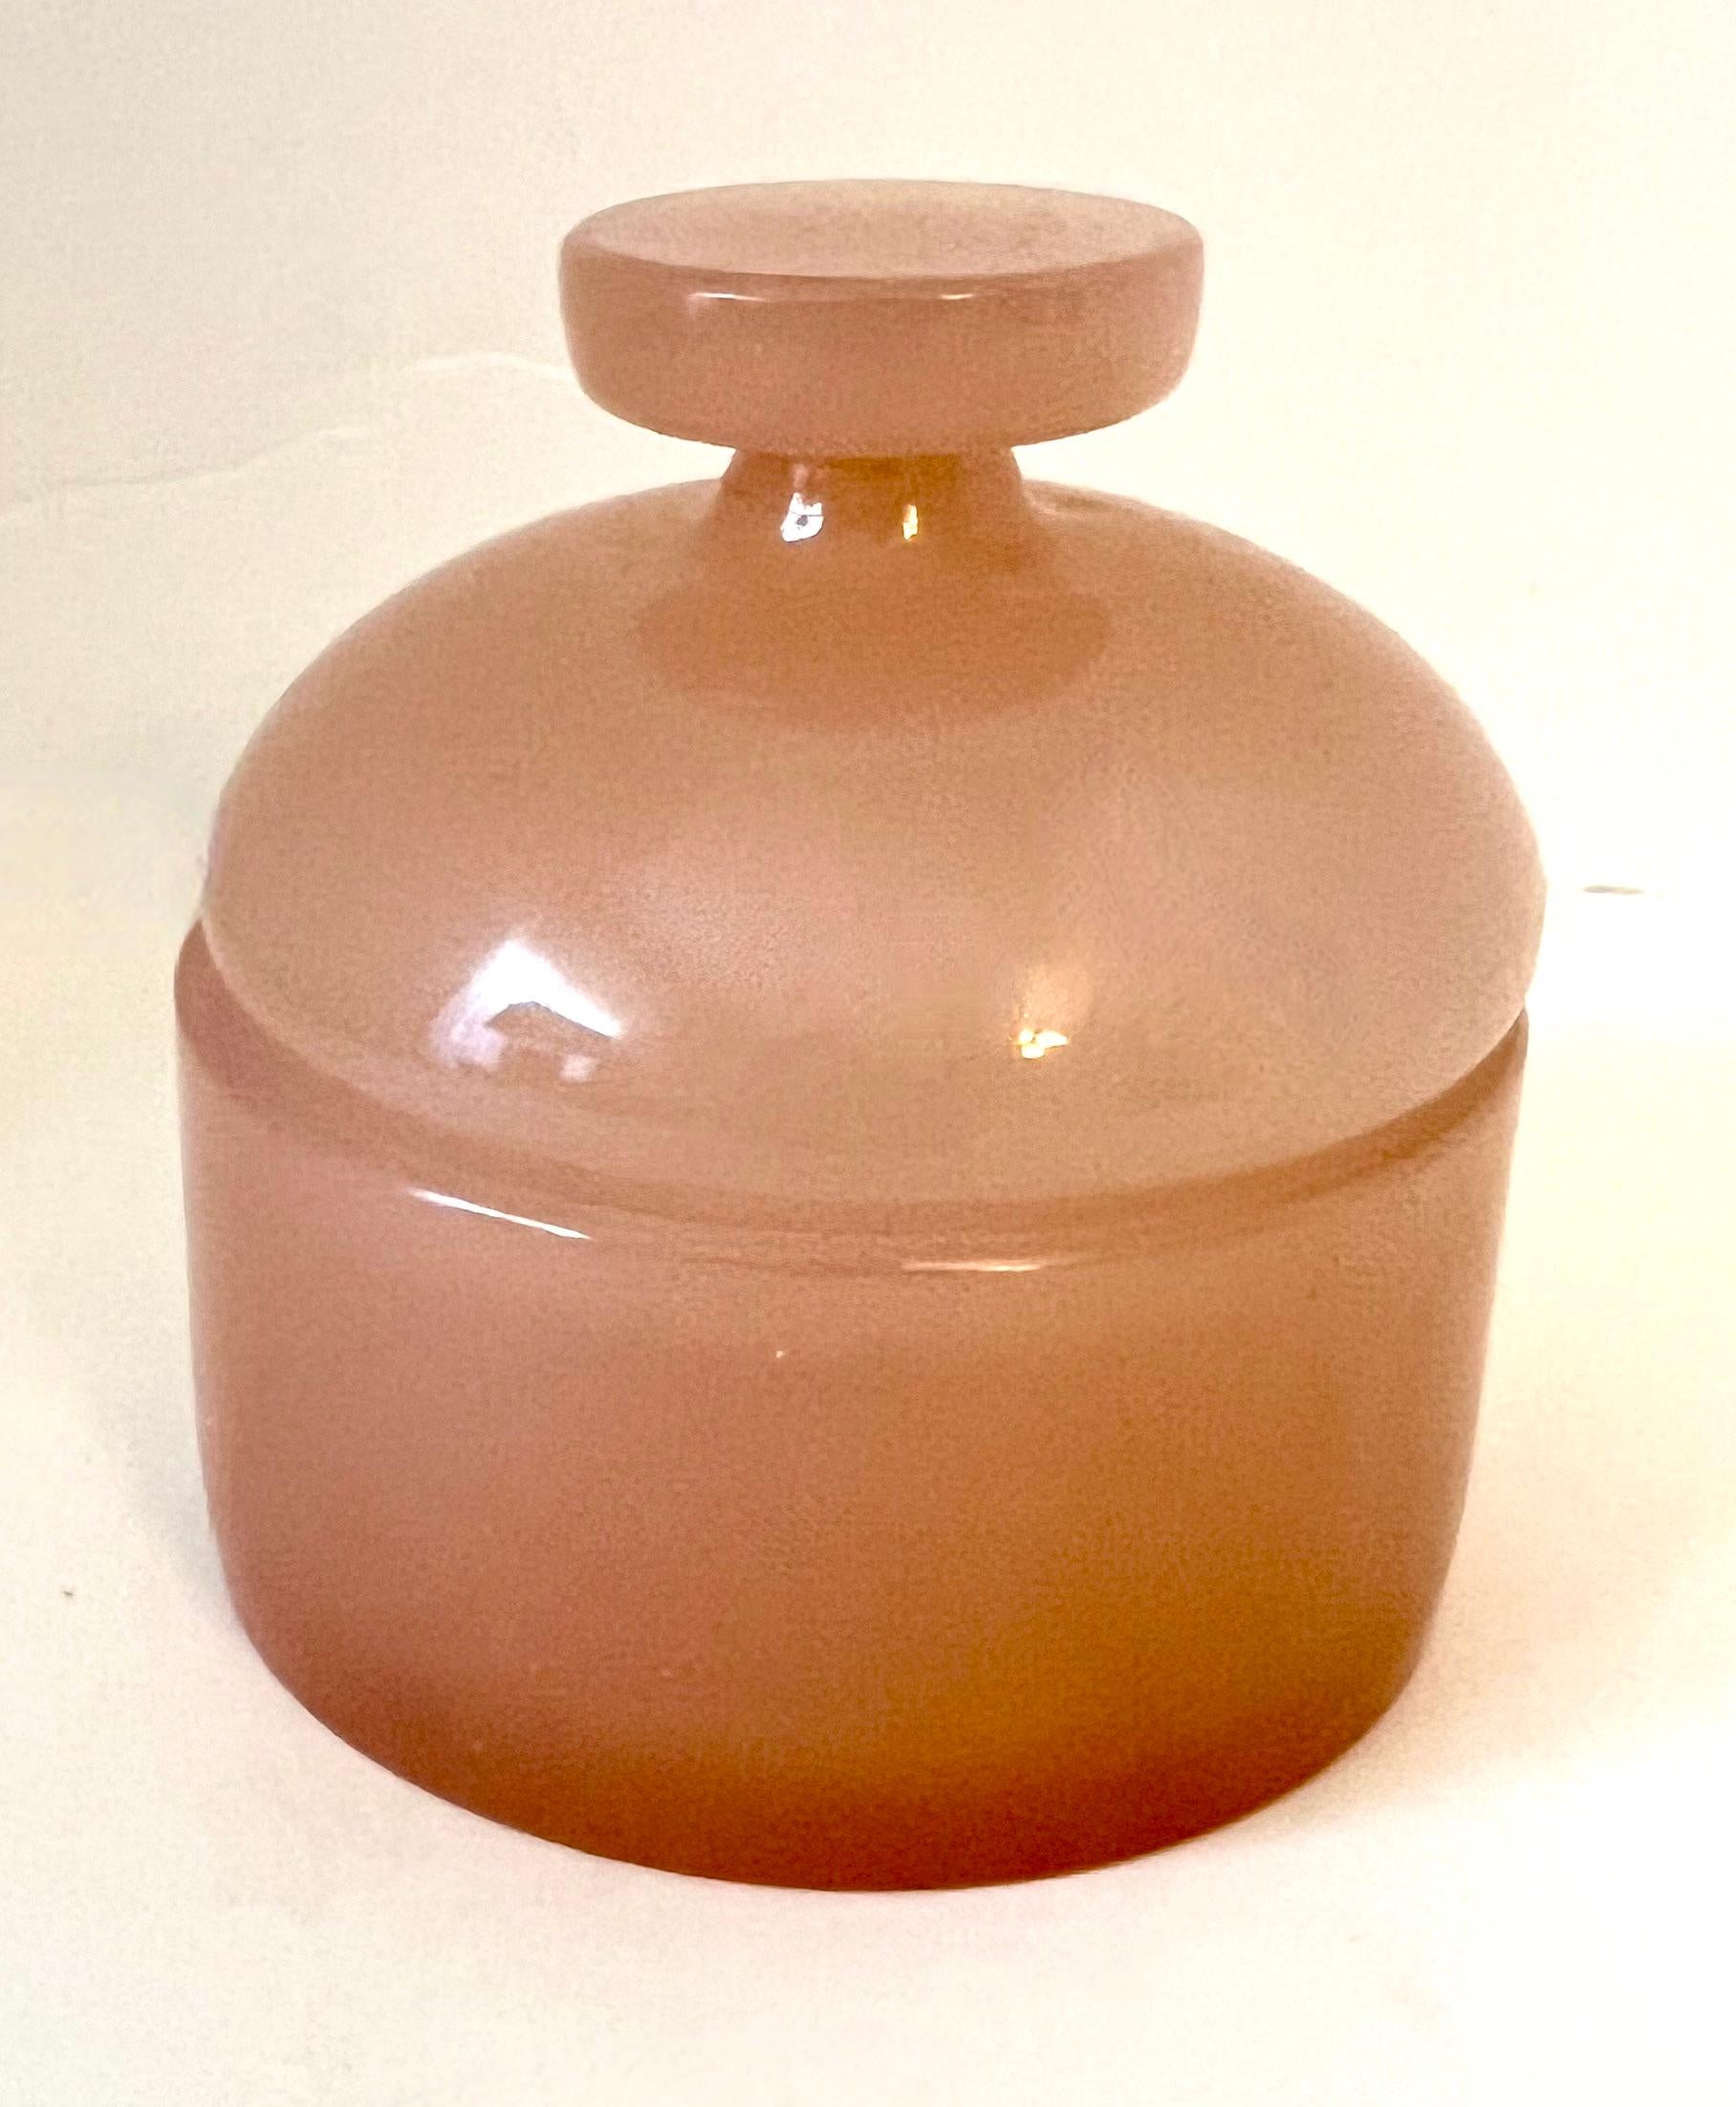 Hand Blown Italian Murano Cenedese apothecary Jar.  The piece is a unique shade of pink.  A compliment to any vanity, desk or work station.

Can hold anything from Candies, to cotton balls or rubber bands - functional or decorative.  A wonderfully